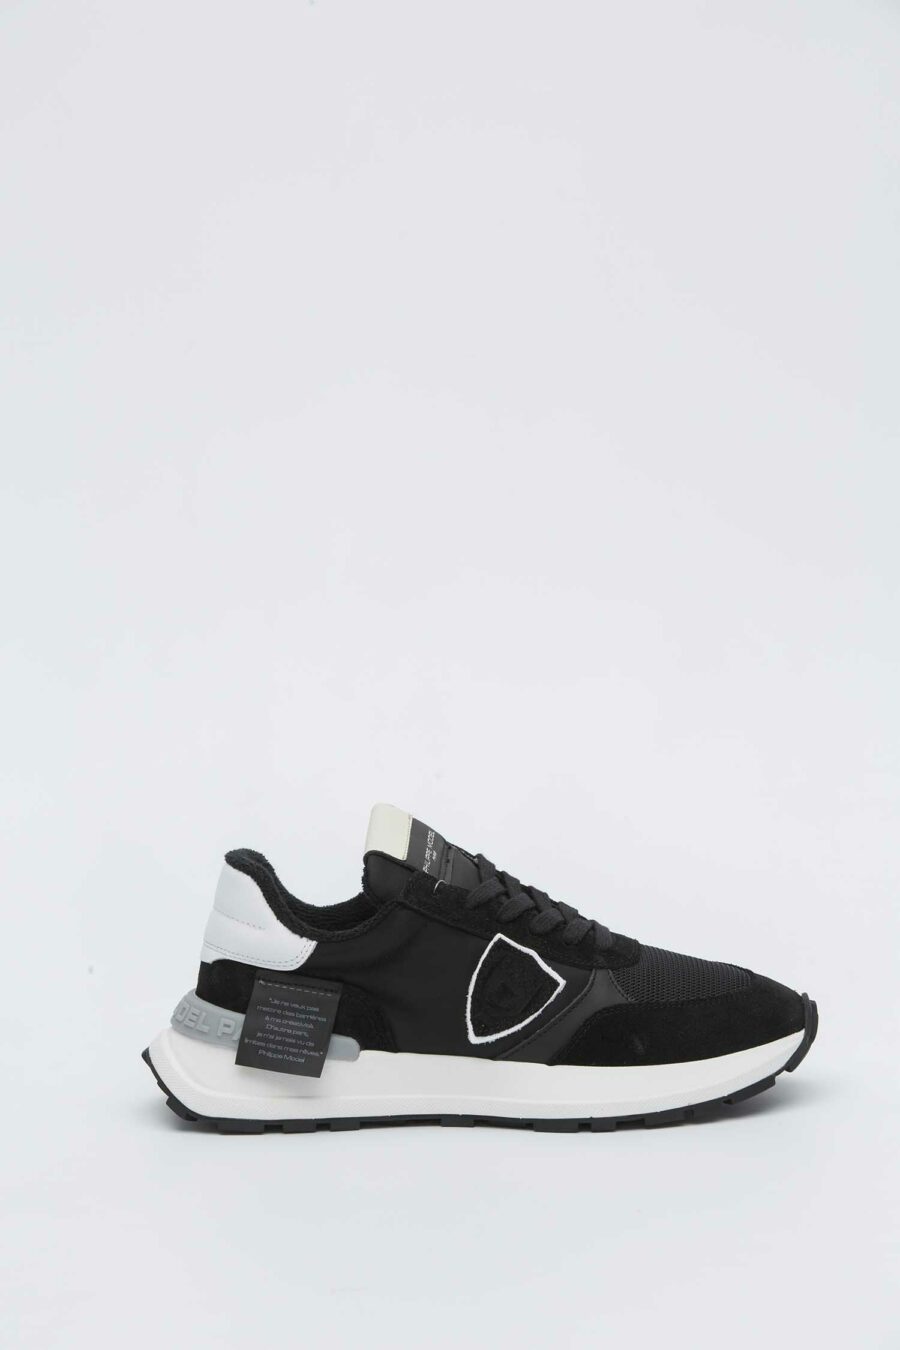 PHILIPPE MODEL-SCARPA ANTIBES NERA SPECIAL PROJECT-PHATLDW001 NER